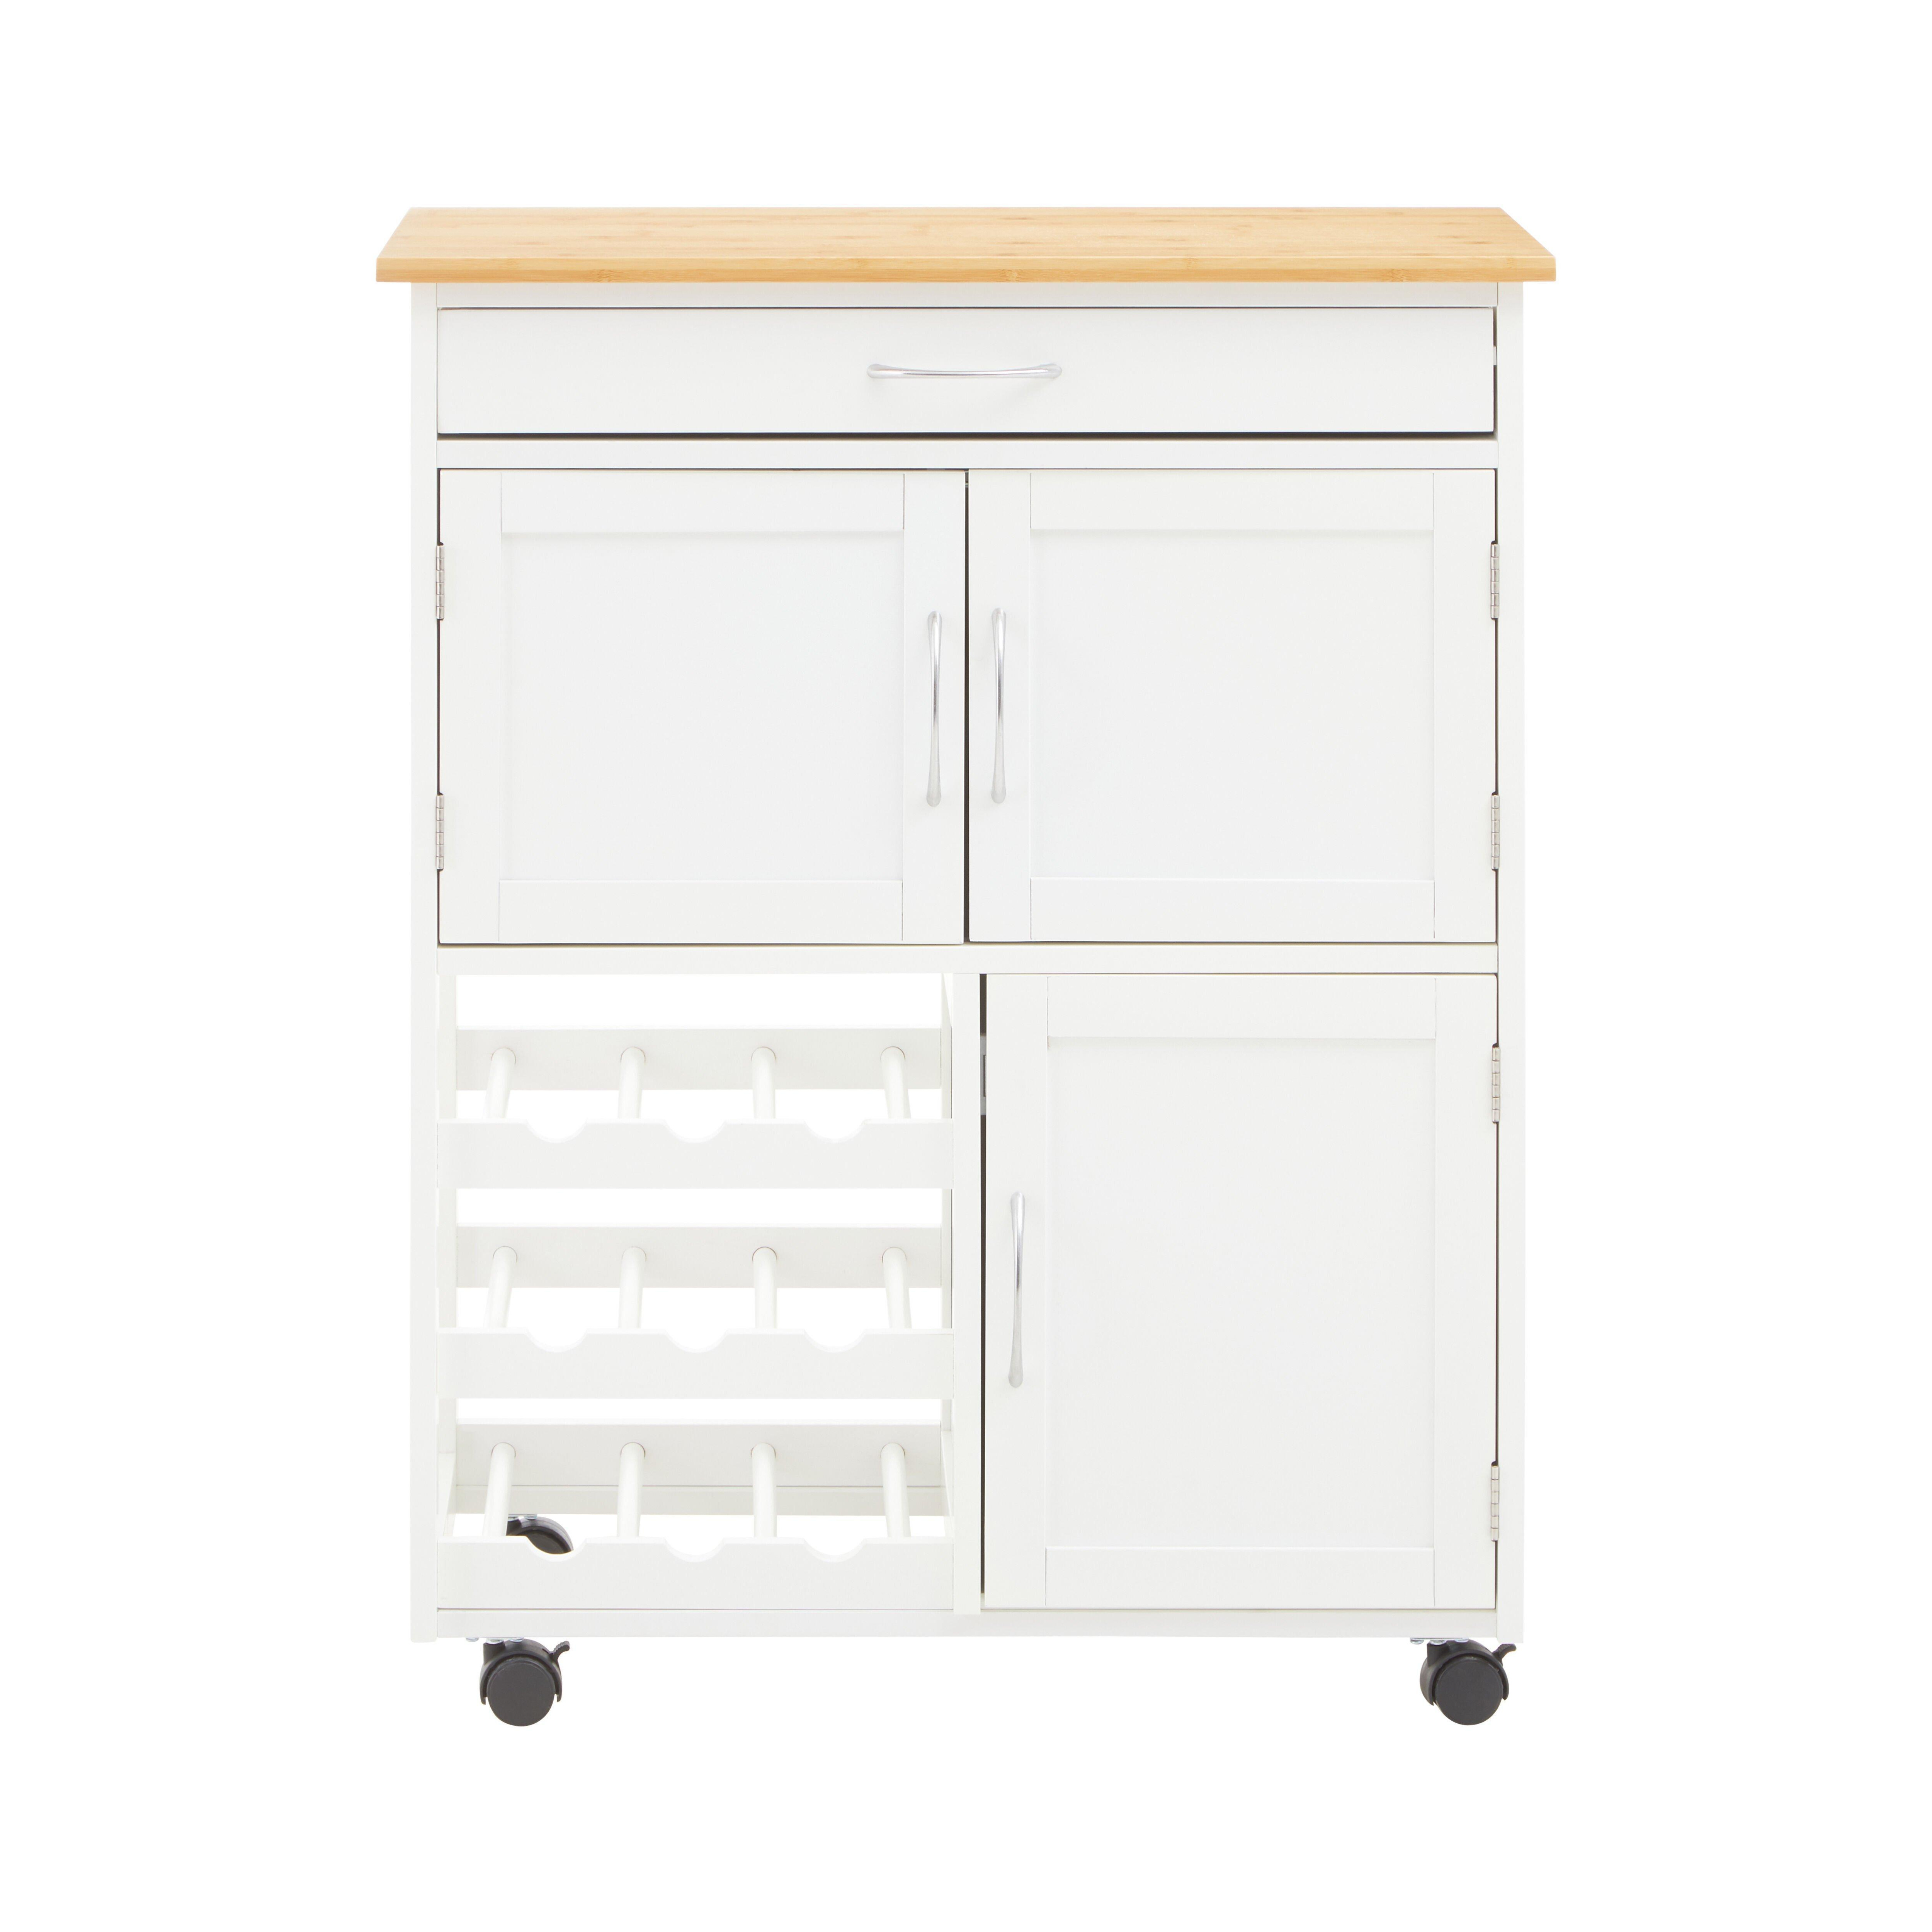 White and Bamboo Top Kitchen Trolley - image 1